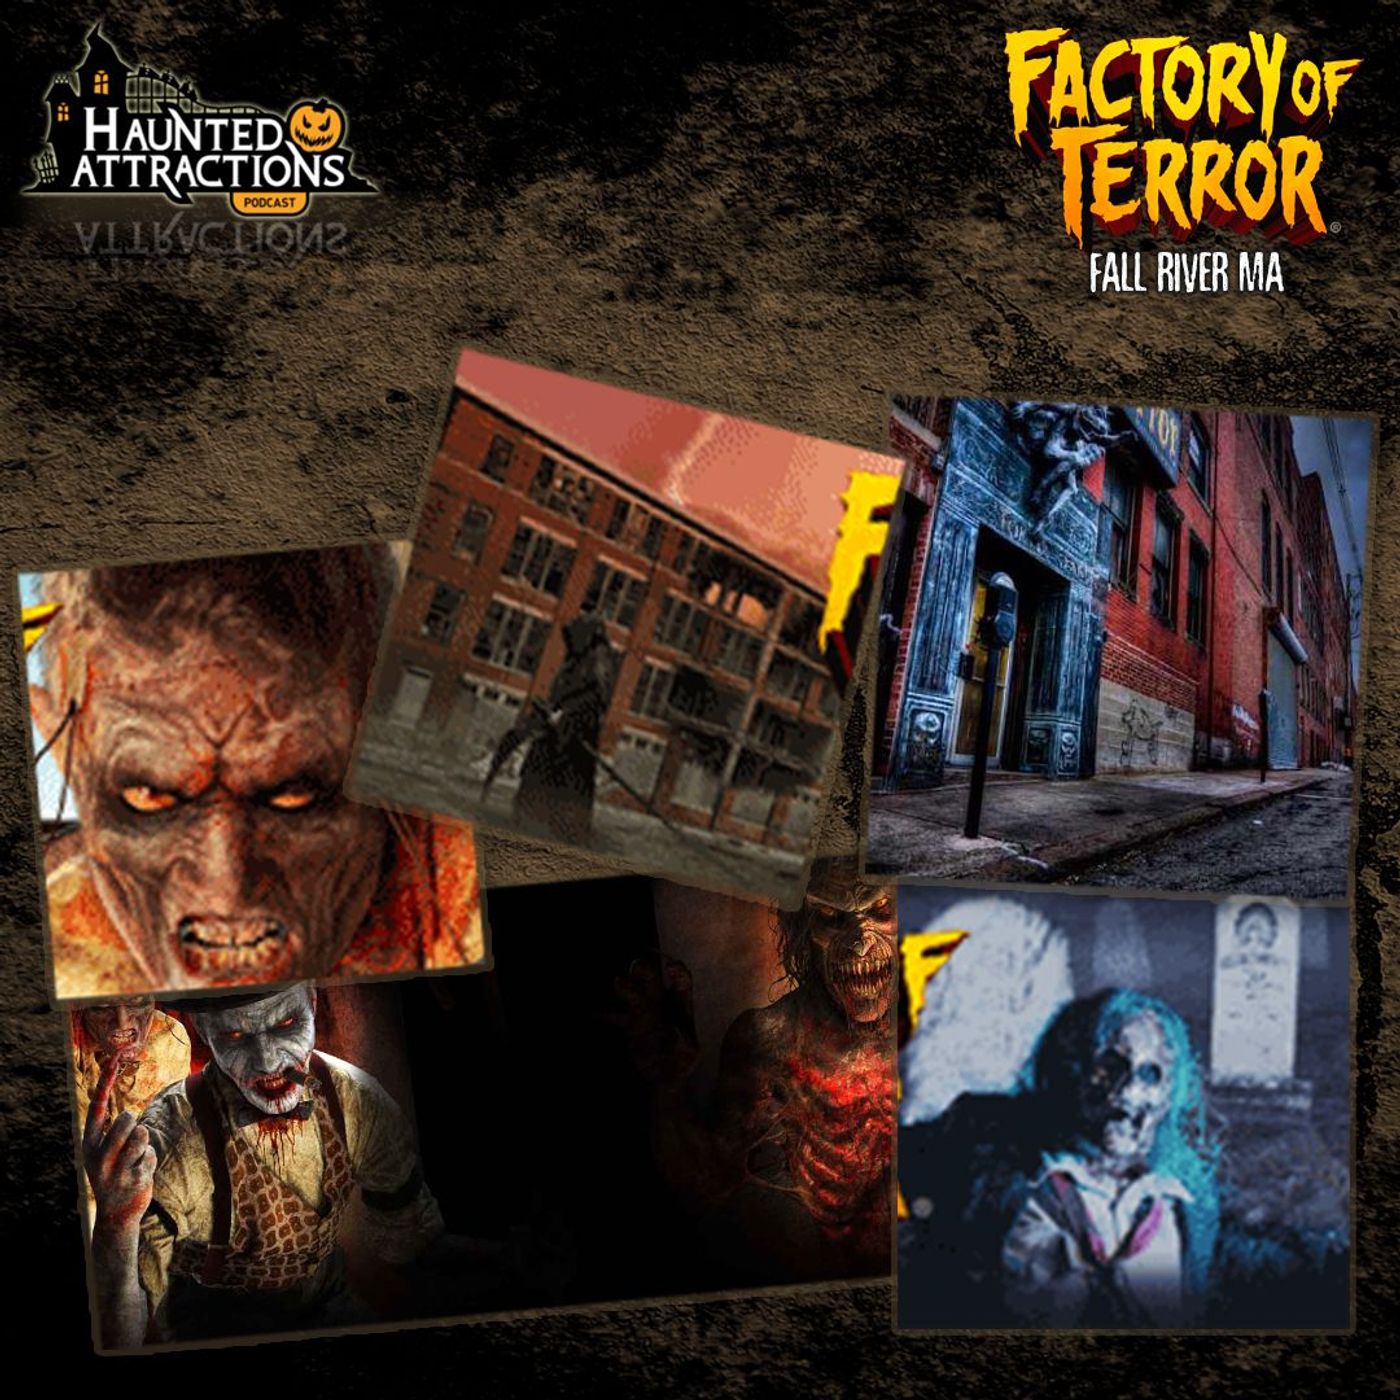 Why should scare actors get ALL the fun?  Factory of Terror Celebrates 20 Years